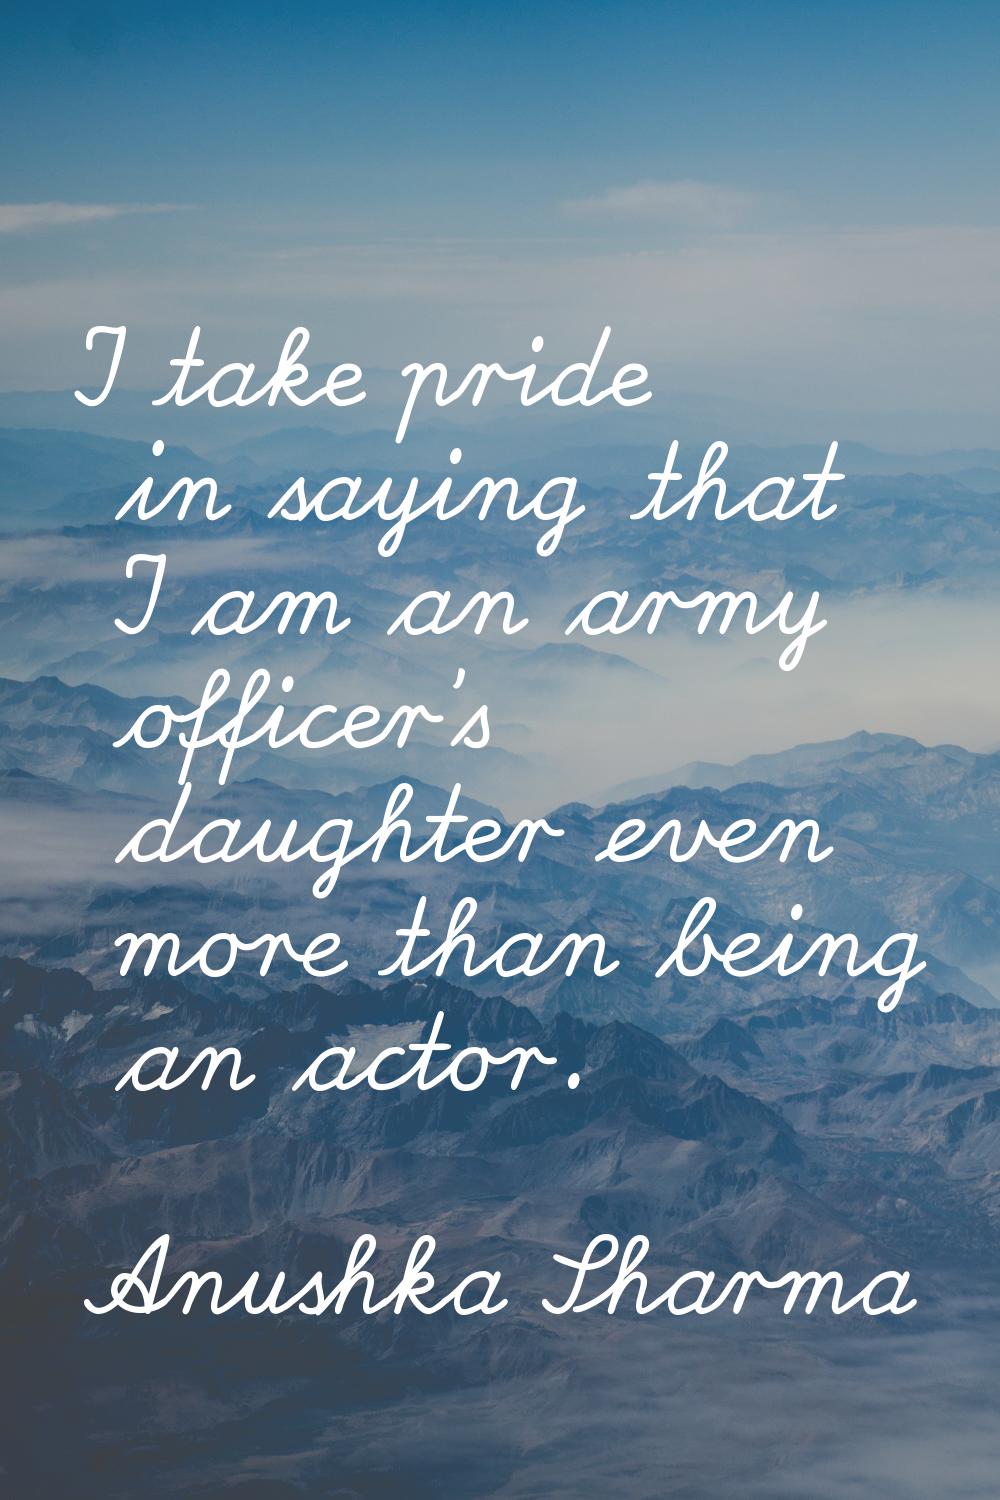 I take pride in saying that I am an army officer's daughter even more than being an actor.